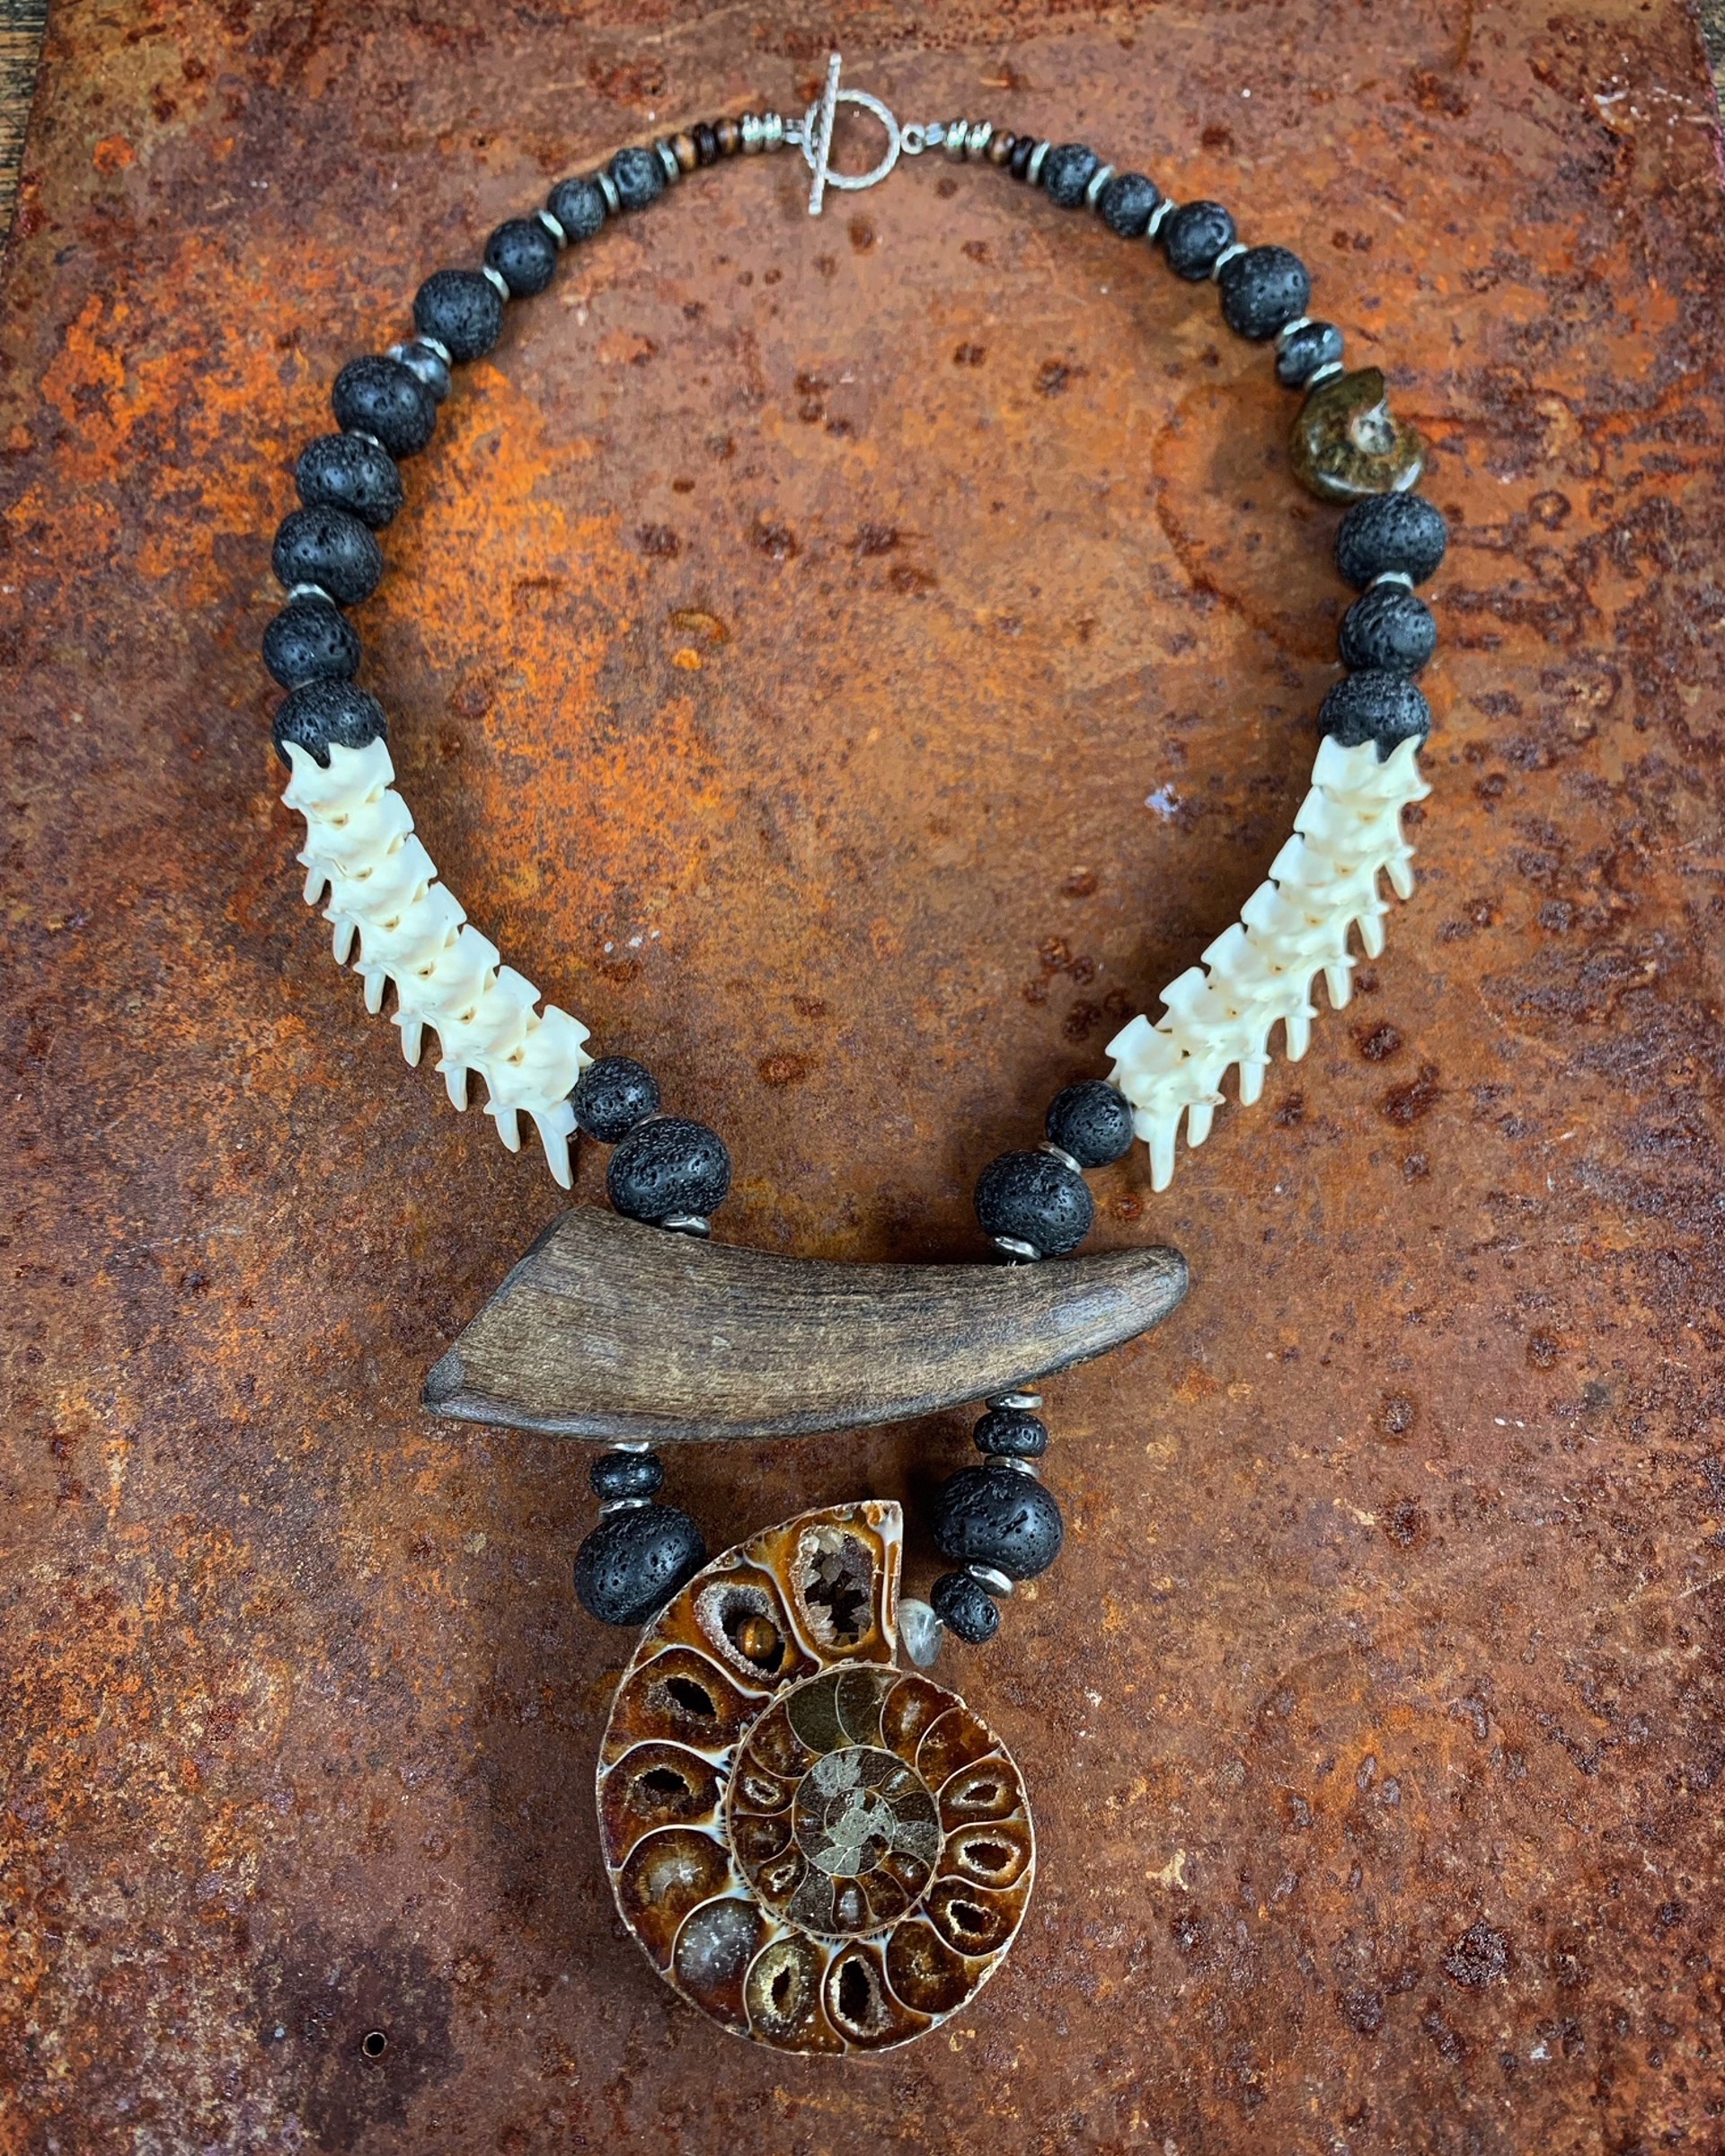 K840 Sufficient Sacrifice Goat Horn, Rattle Snake, Lava, and Ammonite by Kelly Ormsby